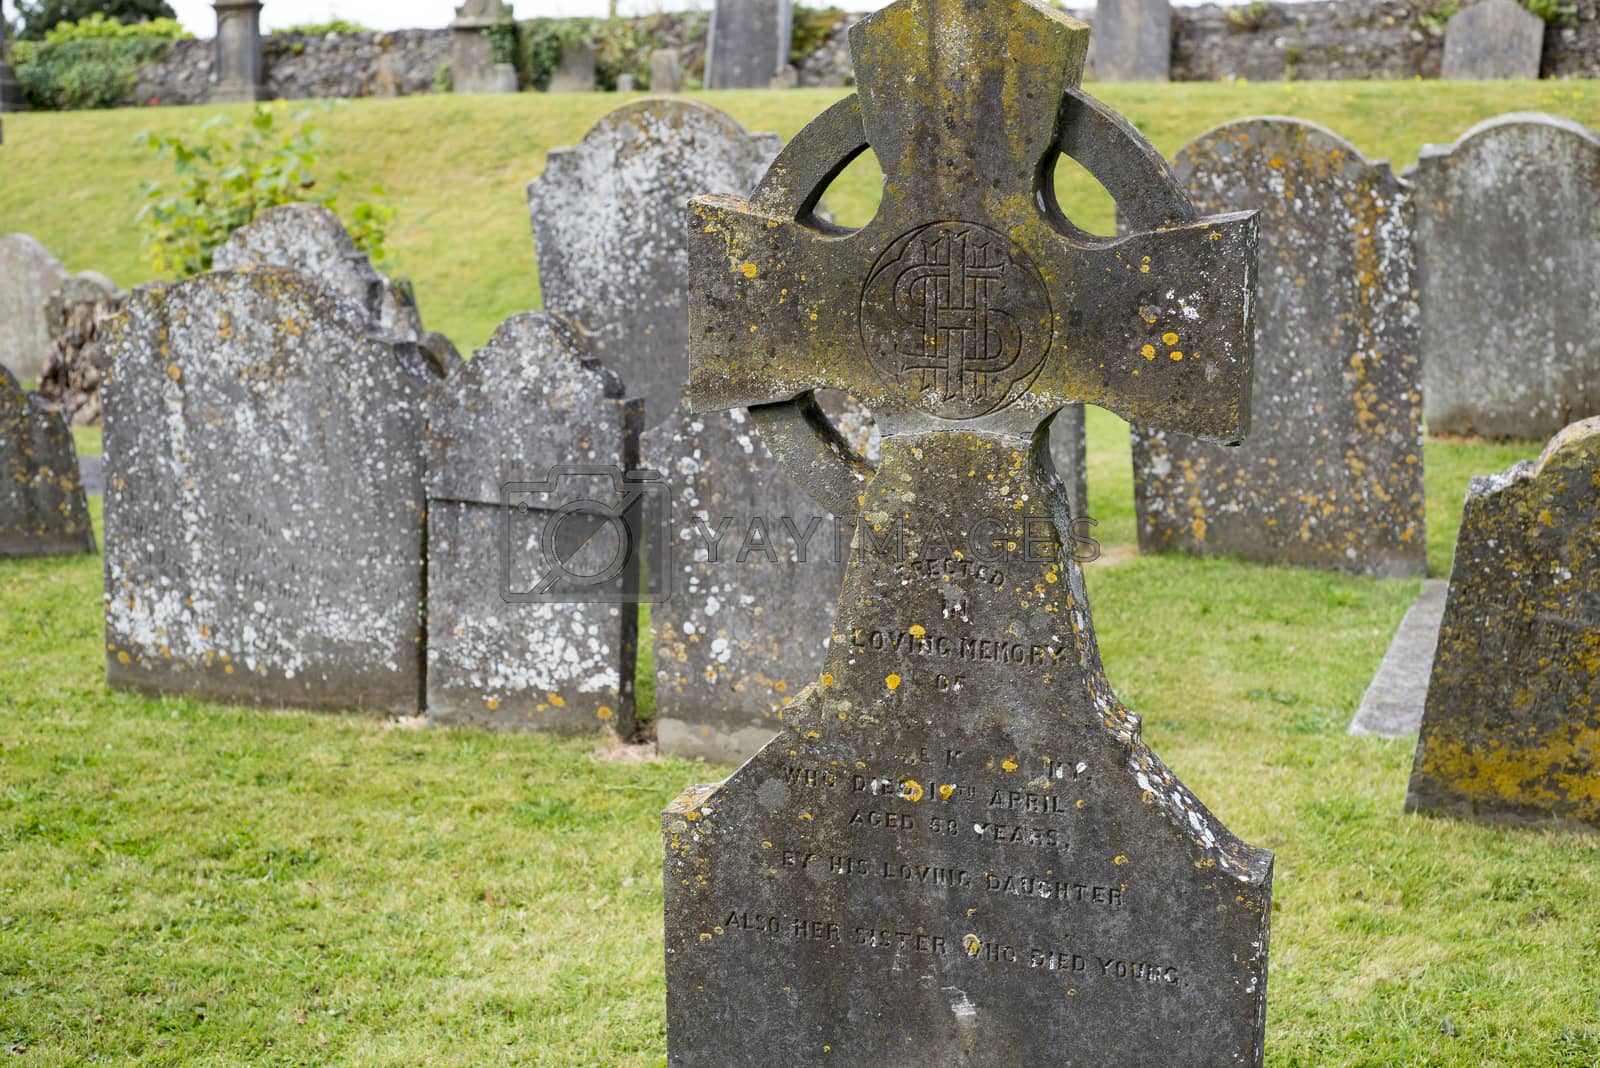 Royalty free image of headstones at ancient graveyard by morrbyte